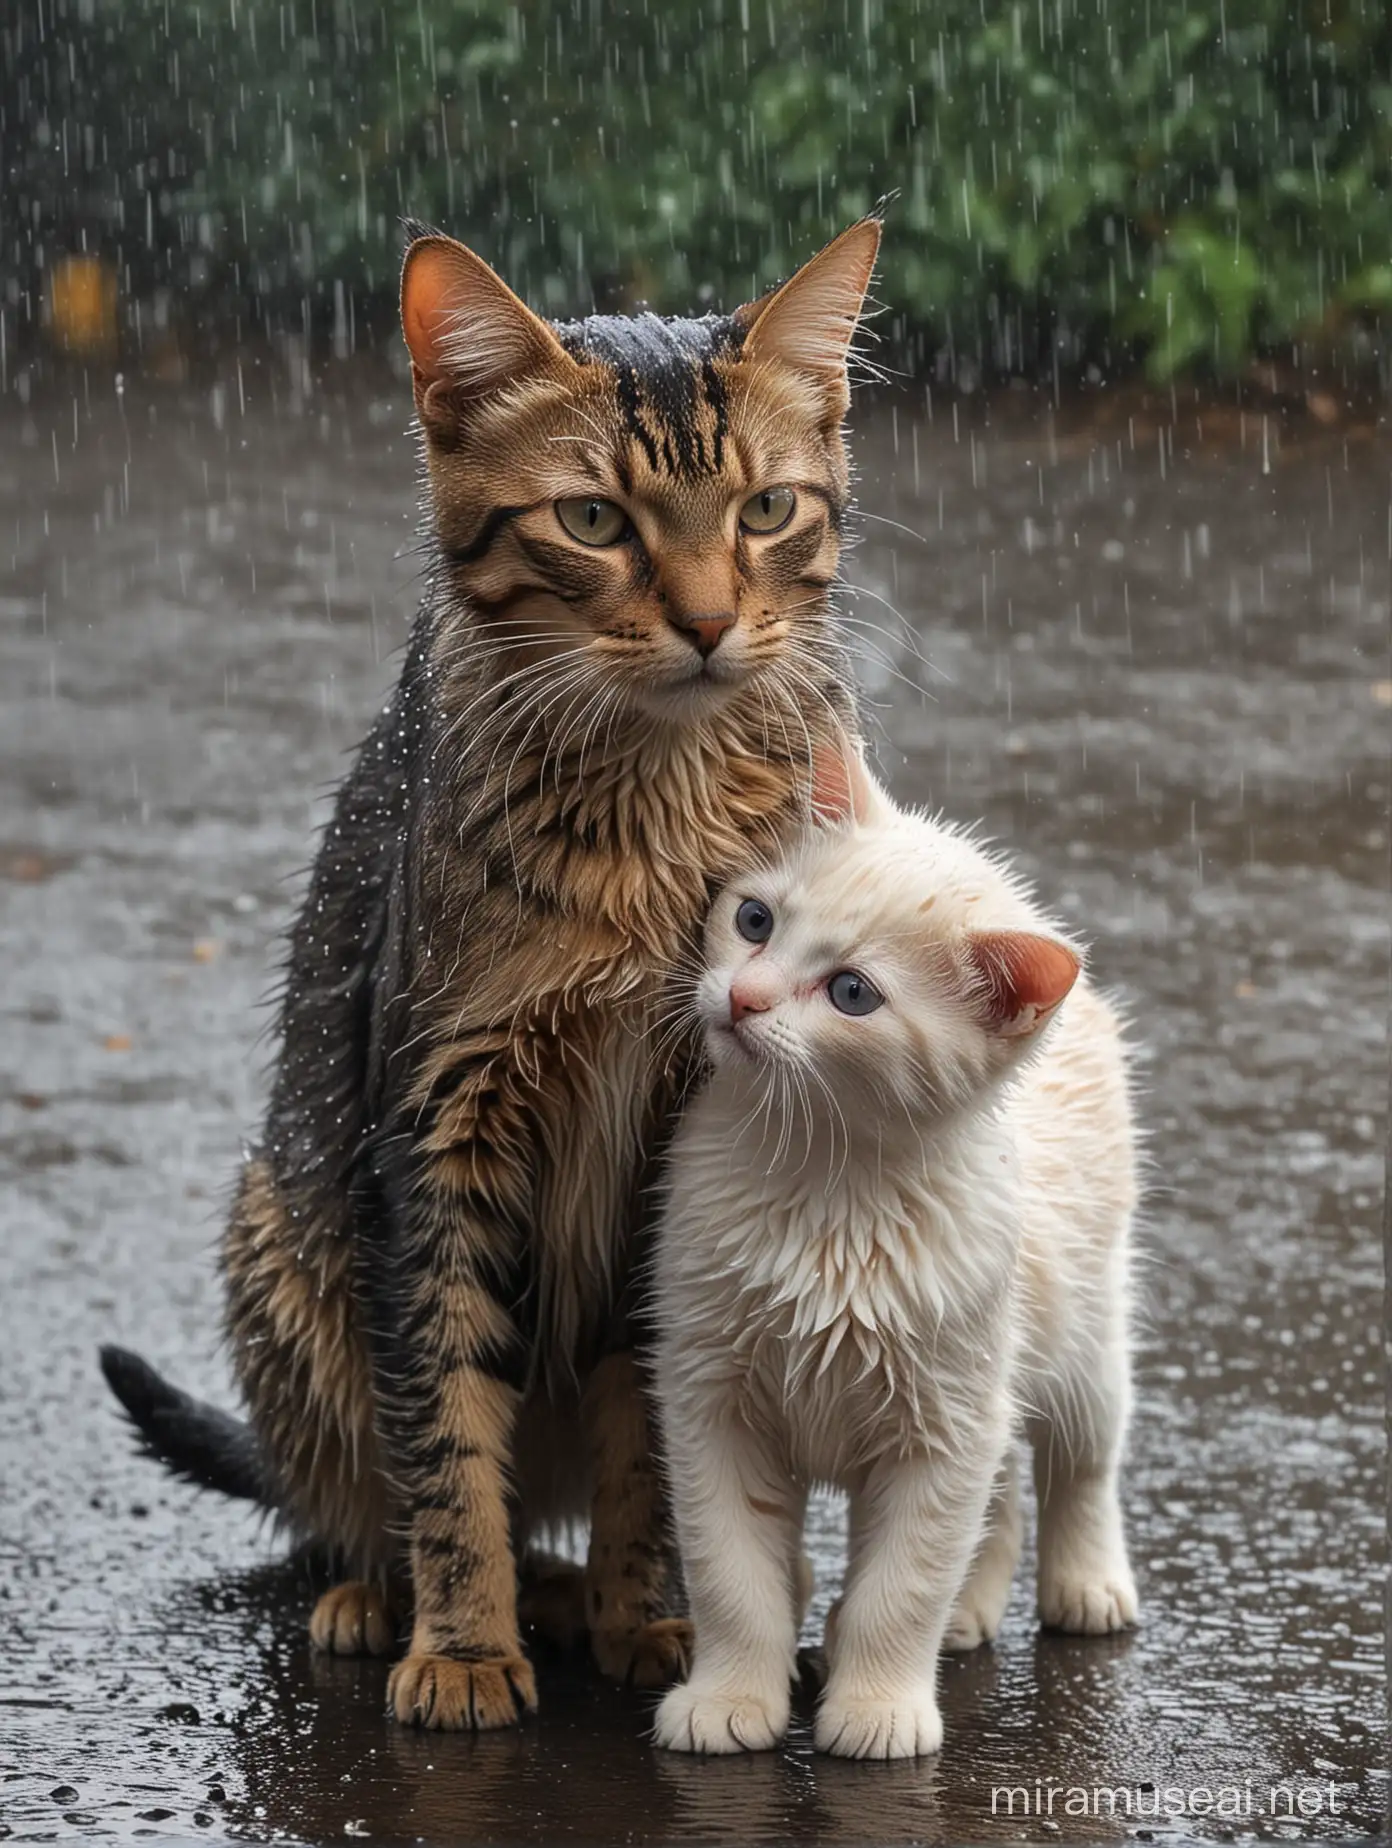 Adorable Cat and Kitten Getting Drenched in Refreshing Rain